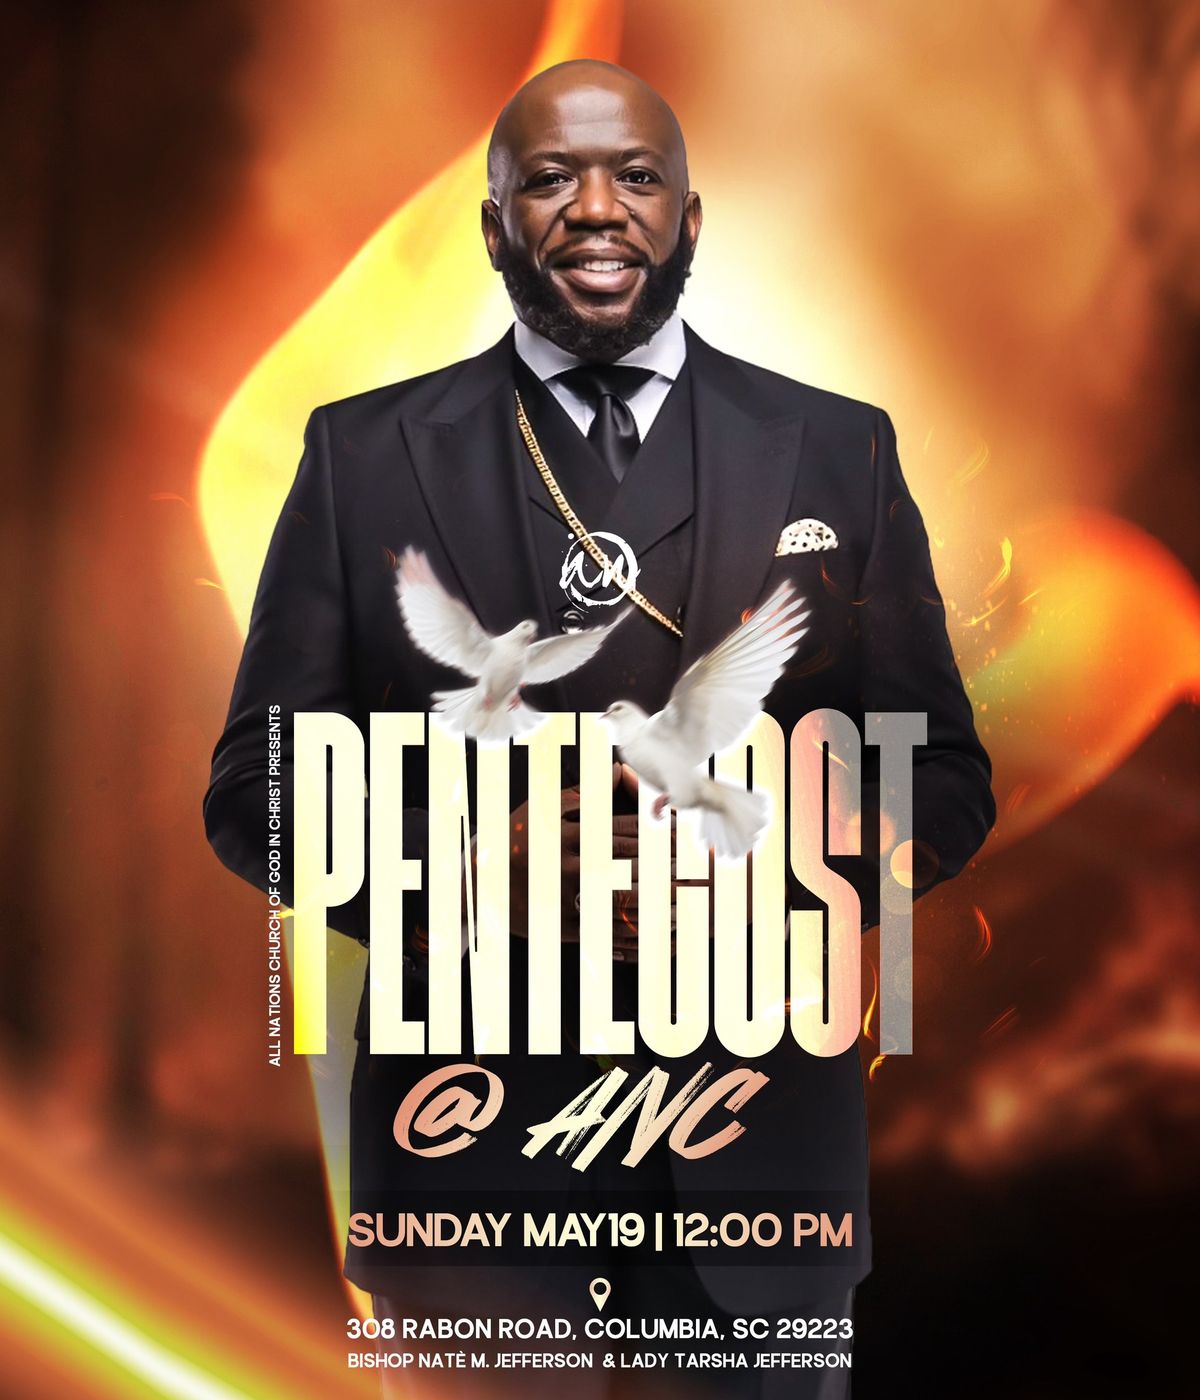 All Nations COGIC - Pentecost Service